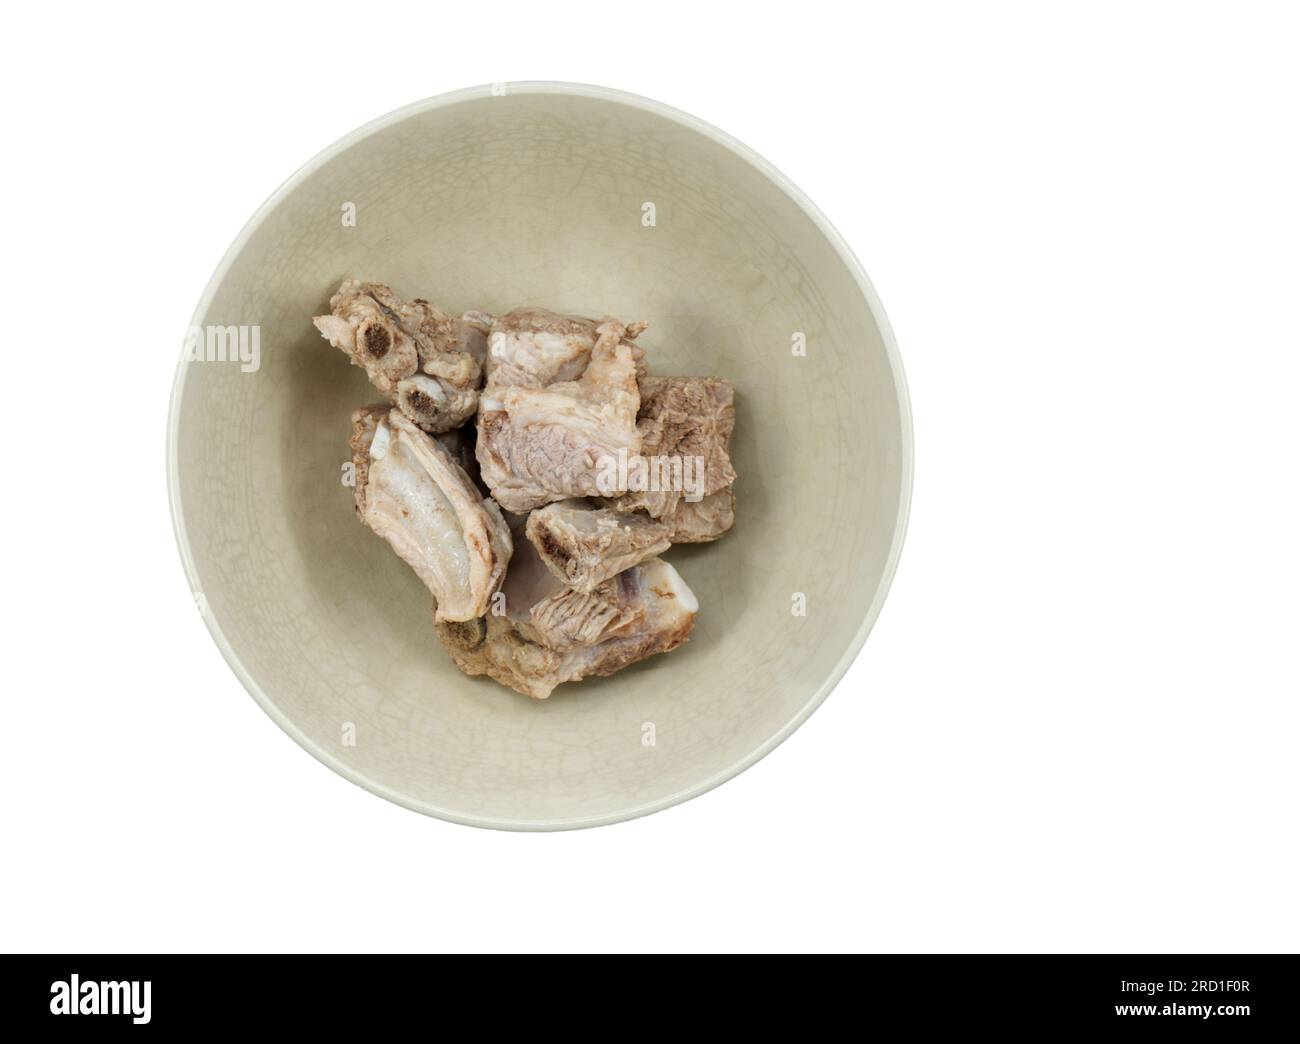 Isolated half-done spare ribs or pig bones in an old bowl on white background, top view image of spare ribs in a bowl, preparing spare ribs for cookin Stock Photo